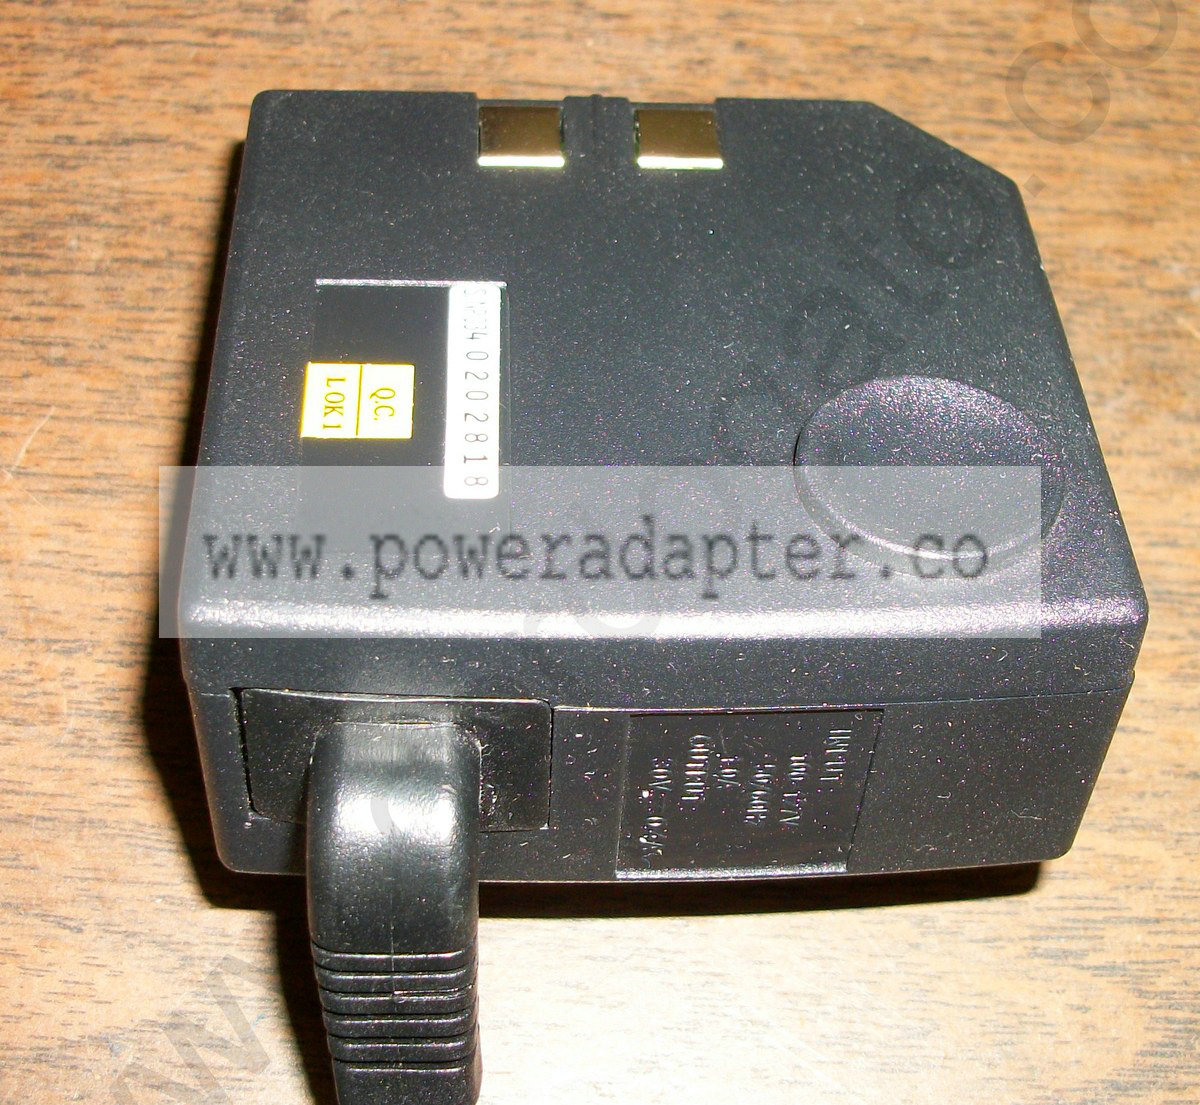 Lexmark 15J0300 Printer AC Adapter by Skynet [15J0300] This AC adapter is for use with some Lexmark printers. Input: 1